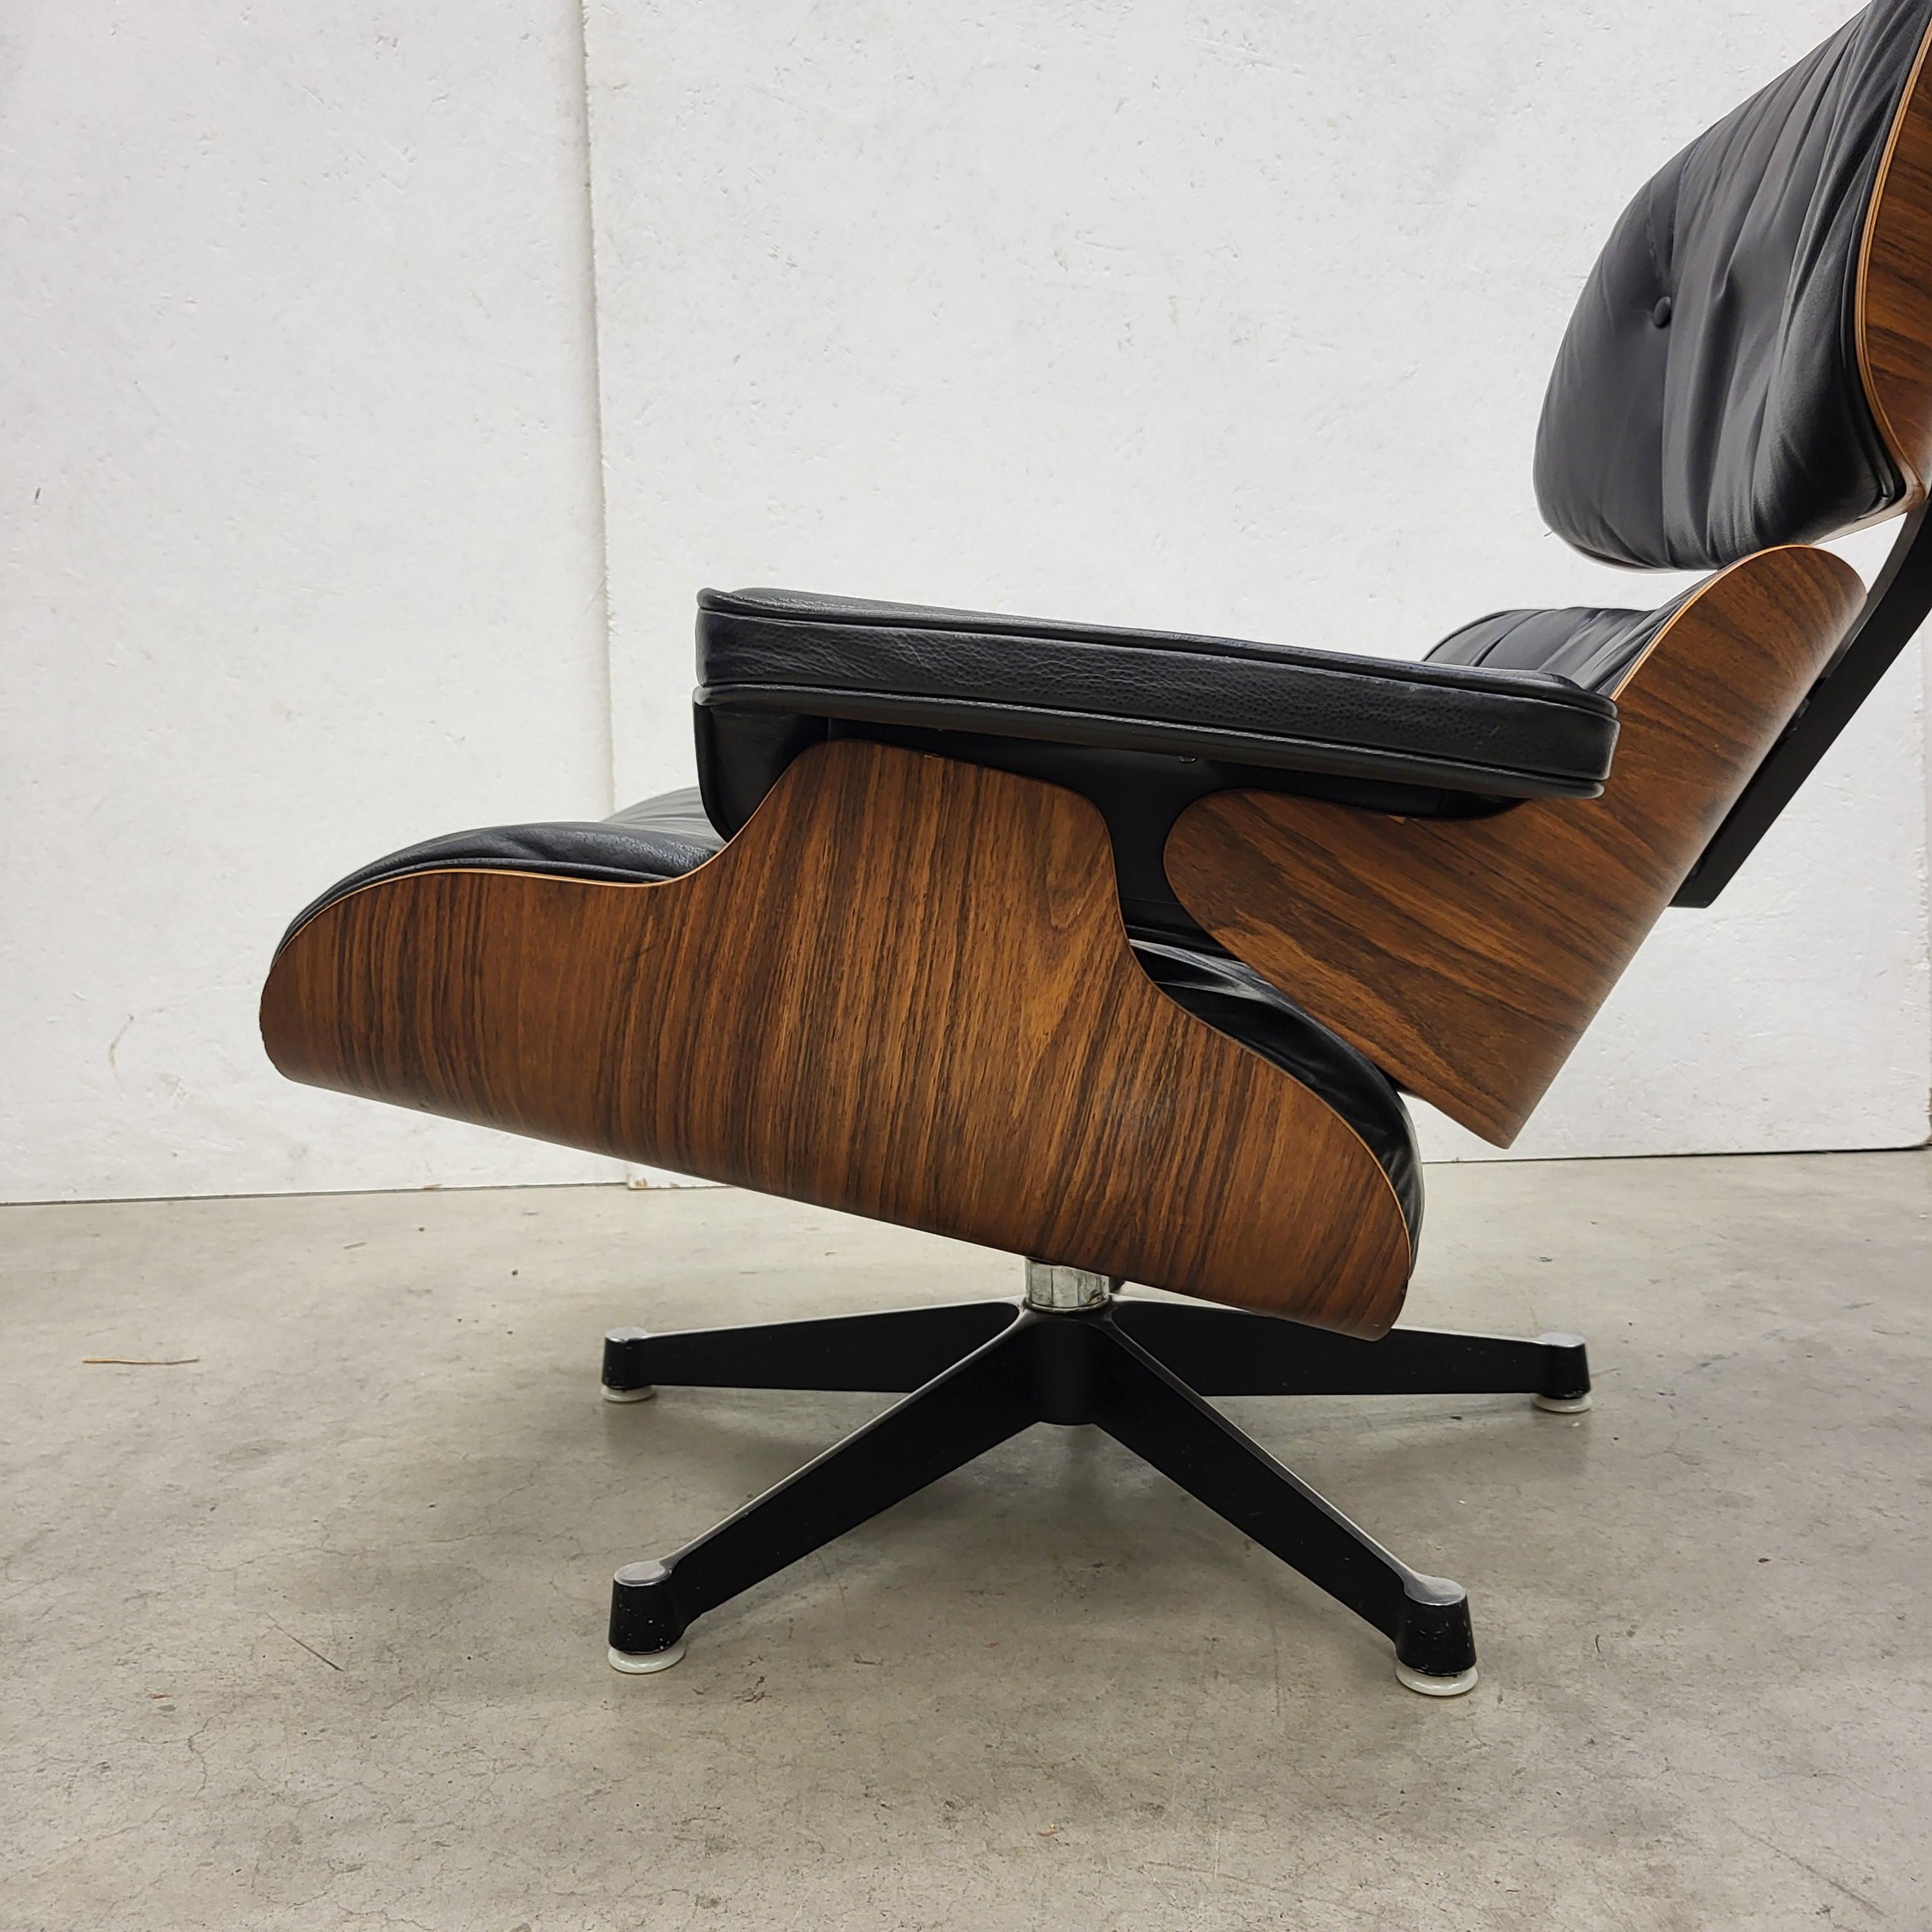 Mid-20th Century Vintage Charles Eames Lounge Chair by Herman Miller 1964